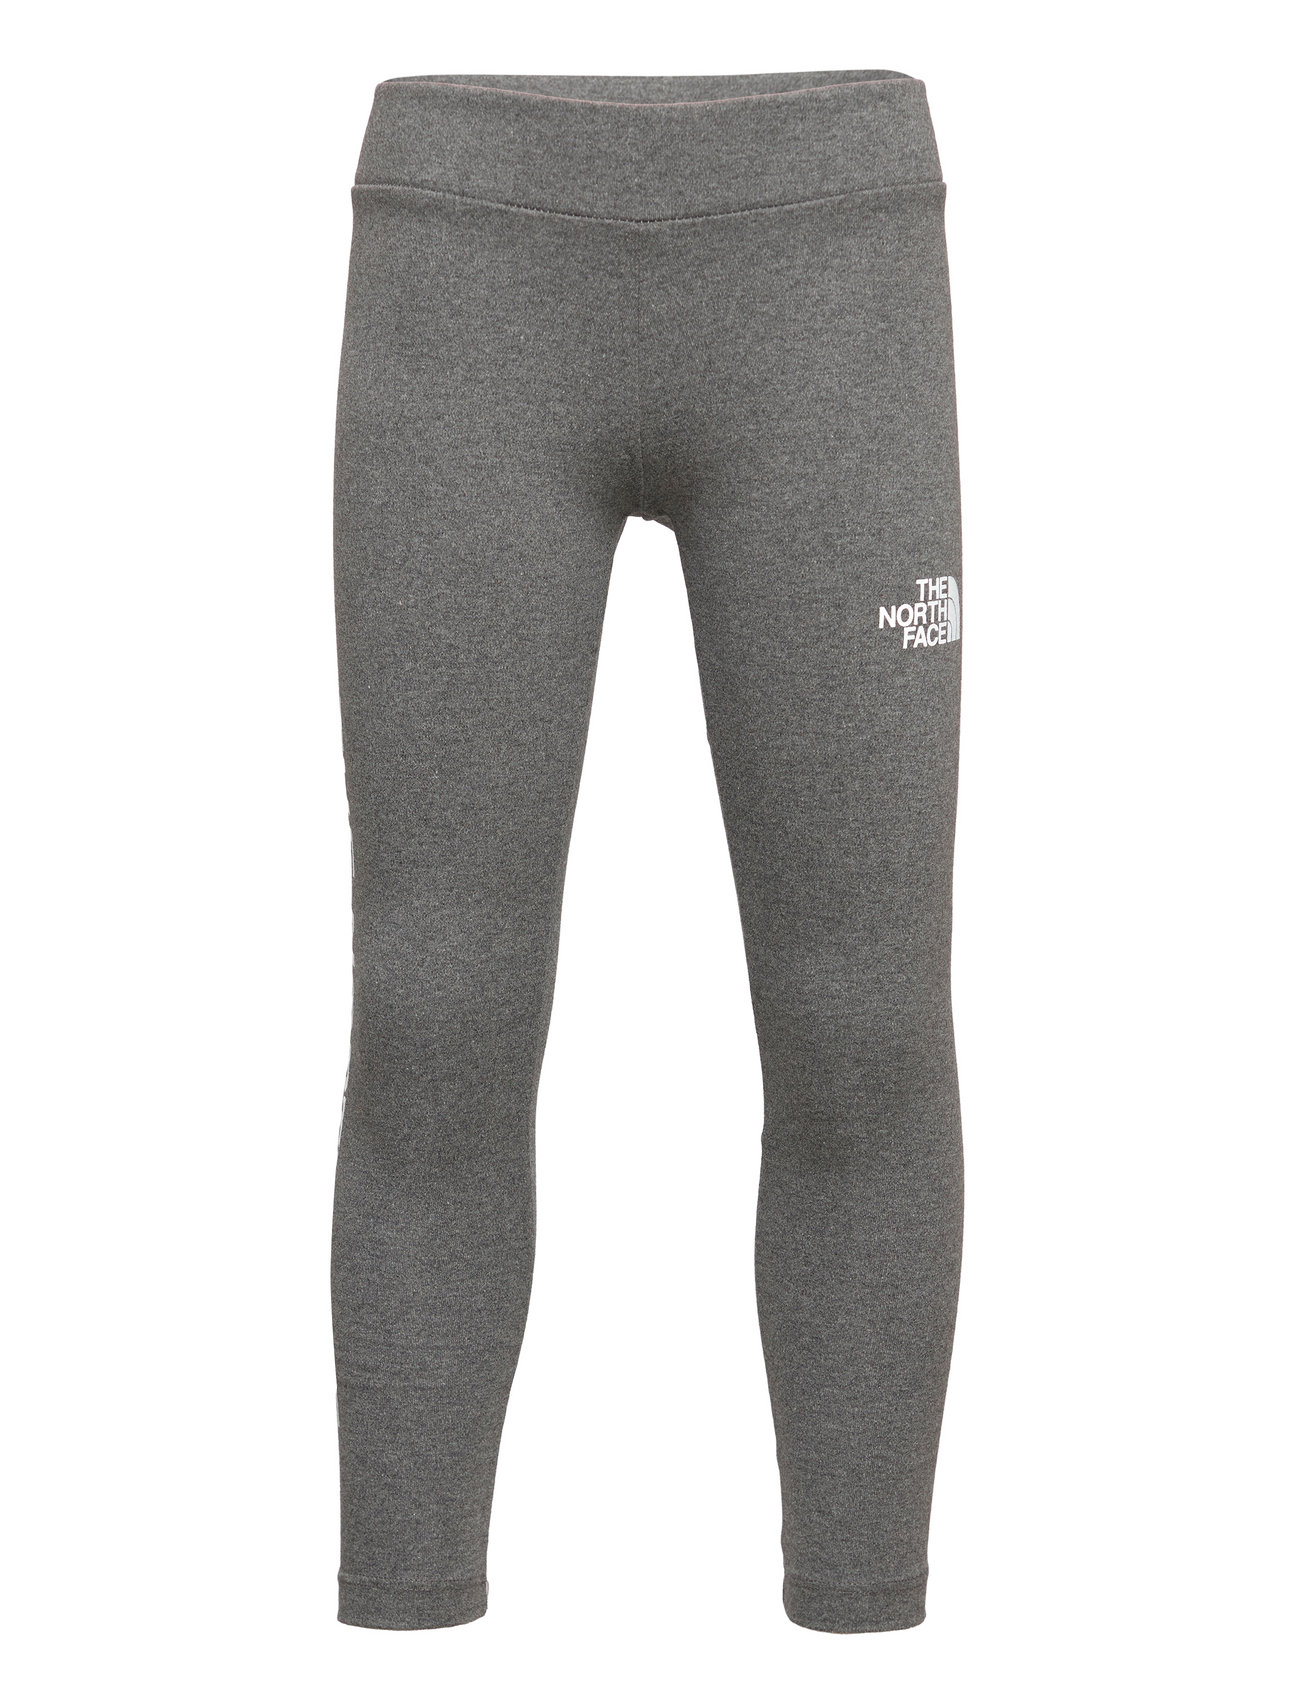 The North Face G Graphic Leggings - Bottoms